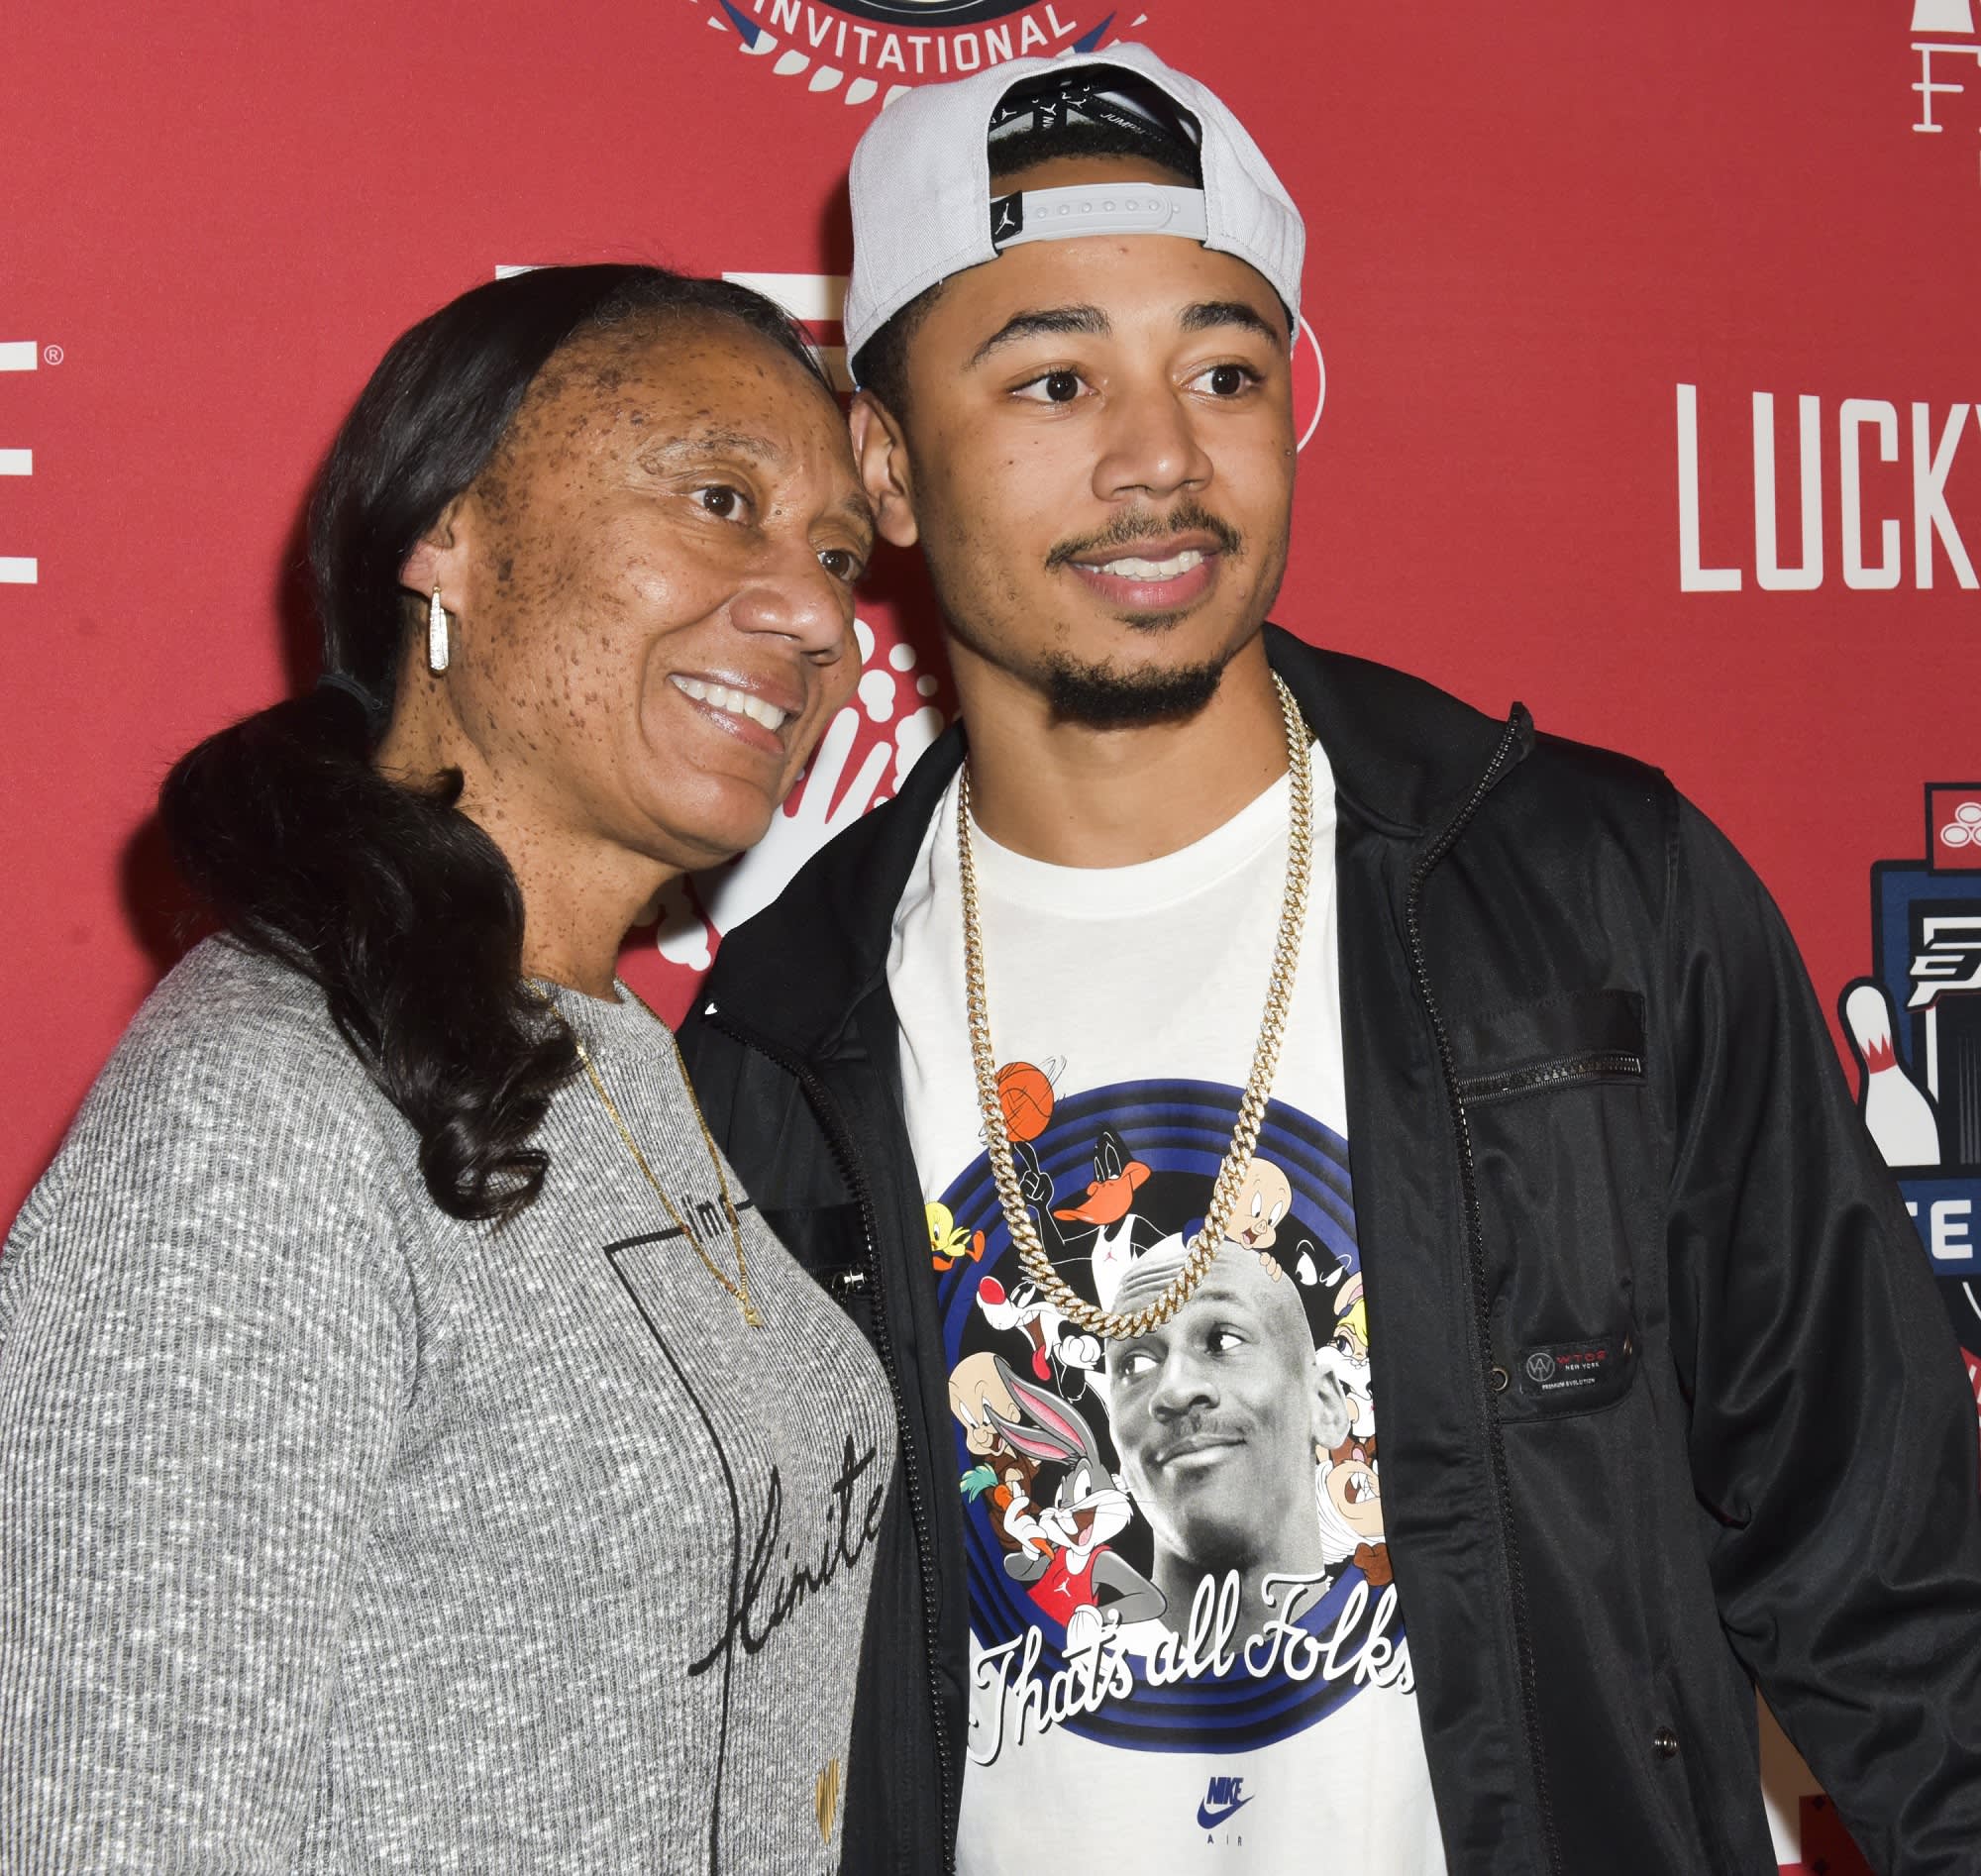 Red Sox, Mookie Betts his Nashville roots and his parents' influence